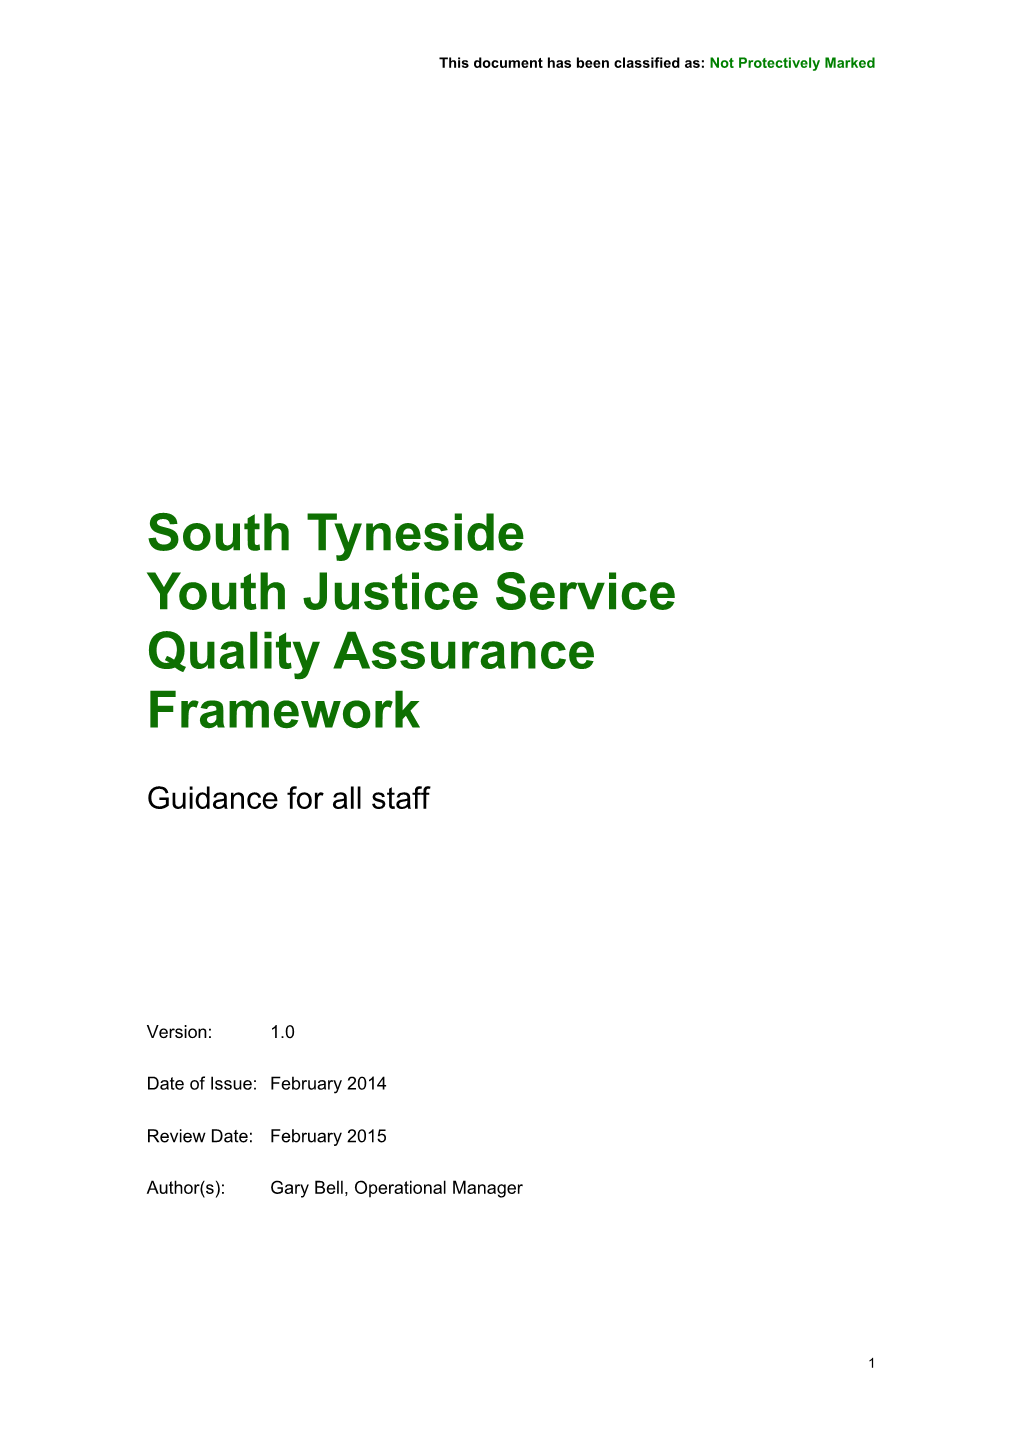 South Tyneside Youth Justice Service Quality Assurance Framework